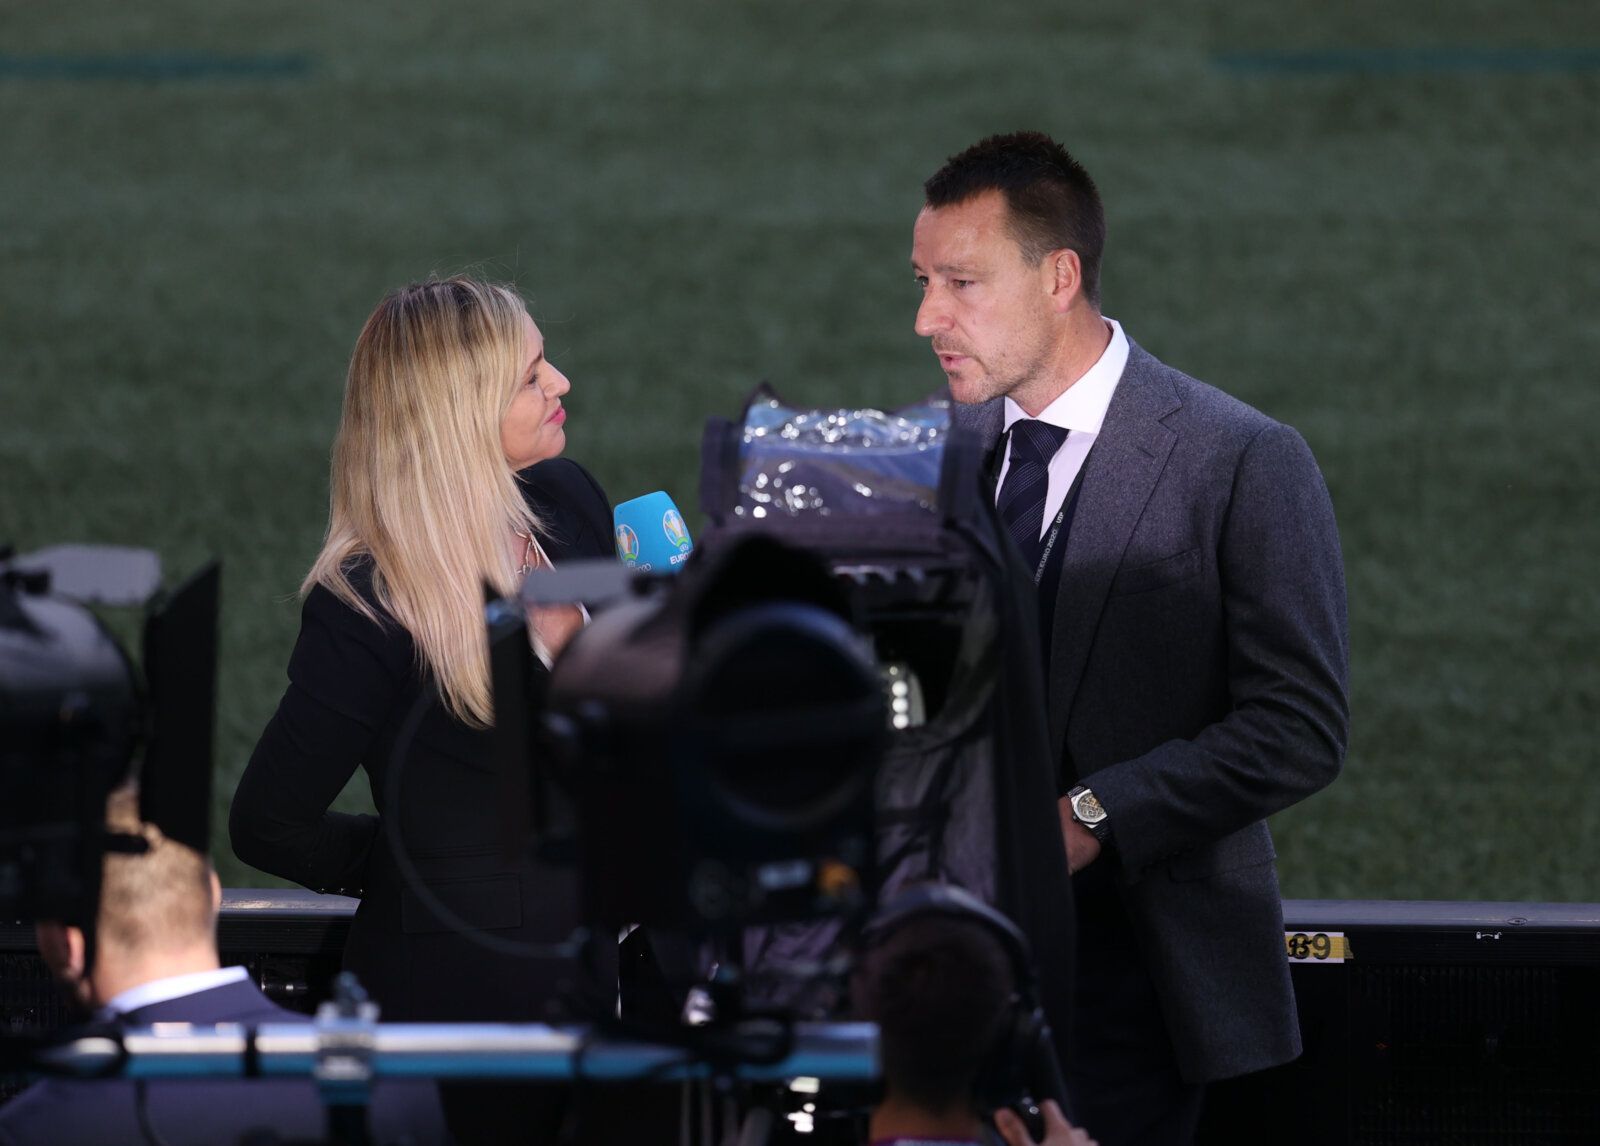 Soccer Football - Euro 2020 - Semi Final - England v Denmark - Wembley Stadium, London, Britain - July 7, 2021 Former England and Chelsea player John Terry being interviewed before the match Pool via REUTERS/Catherine Ivill